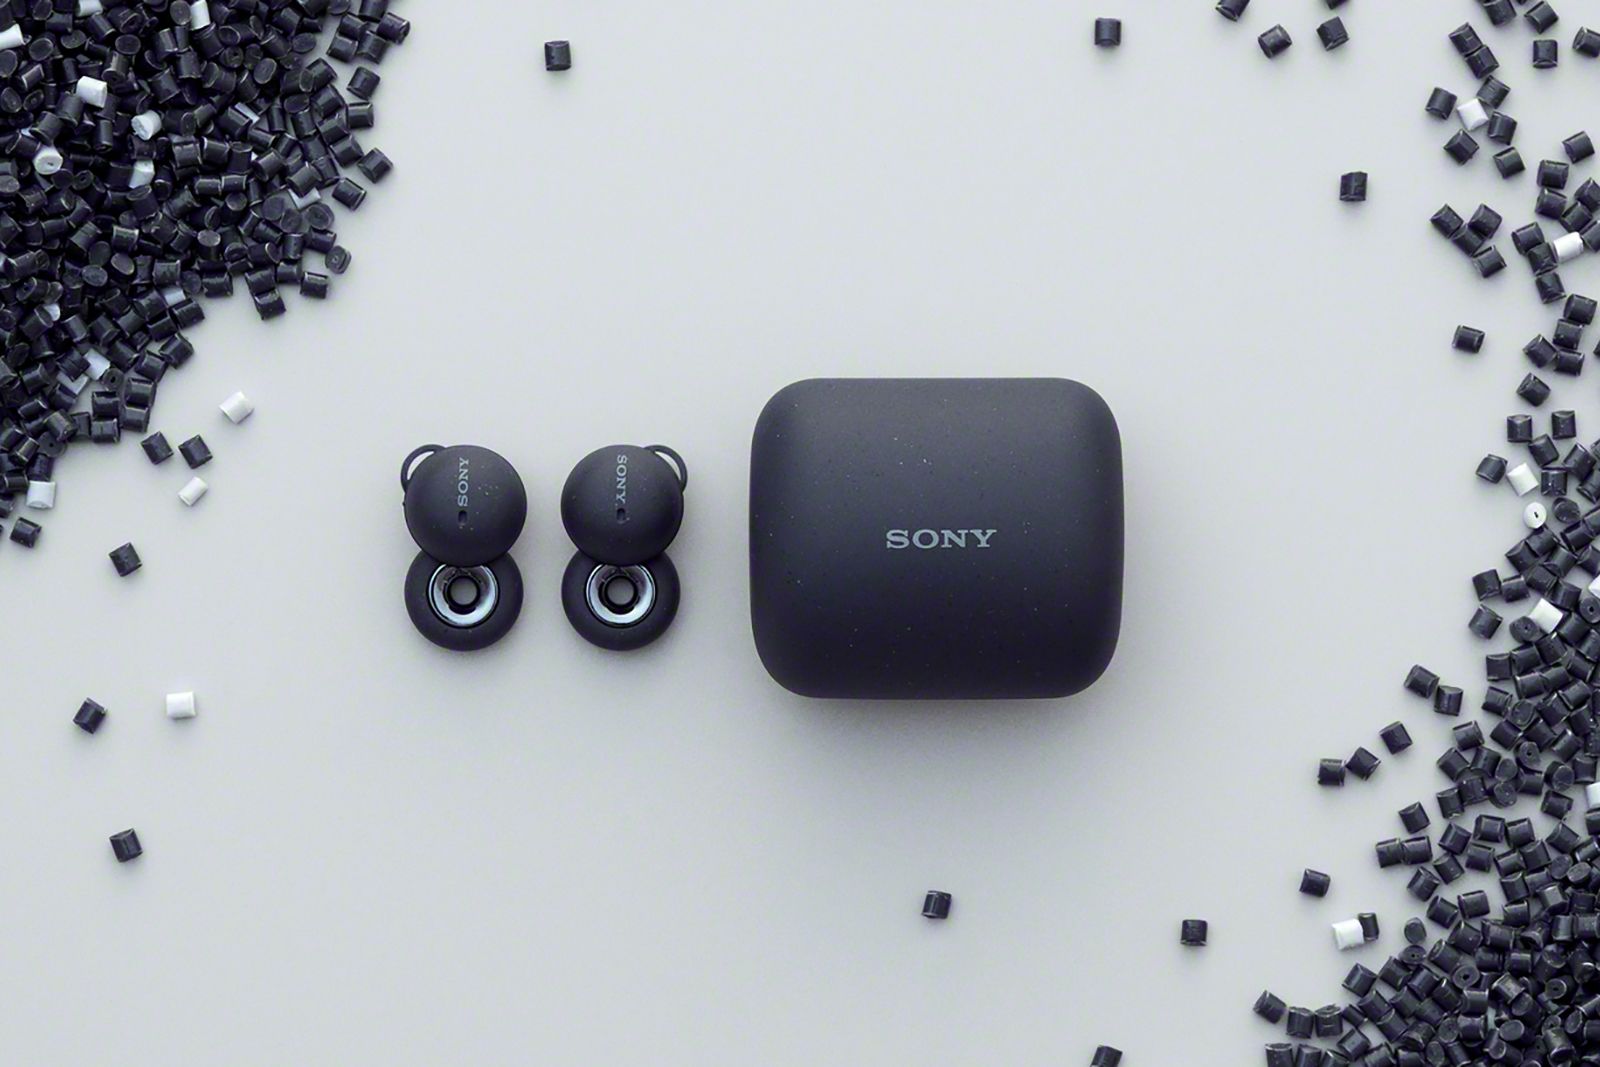 Sony LinkBuds are a new type of TWS earphones photo 3